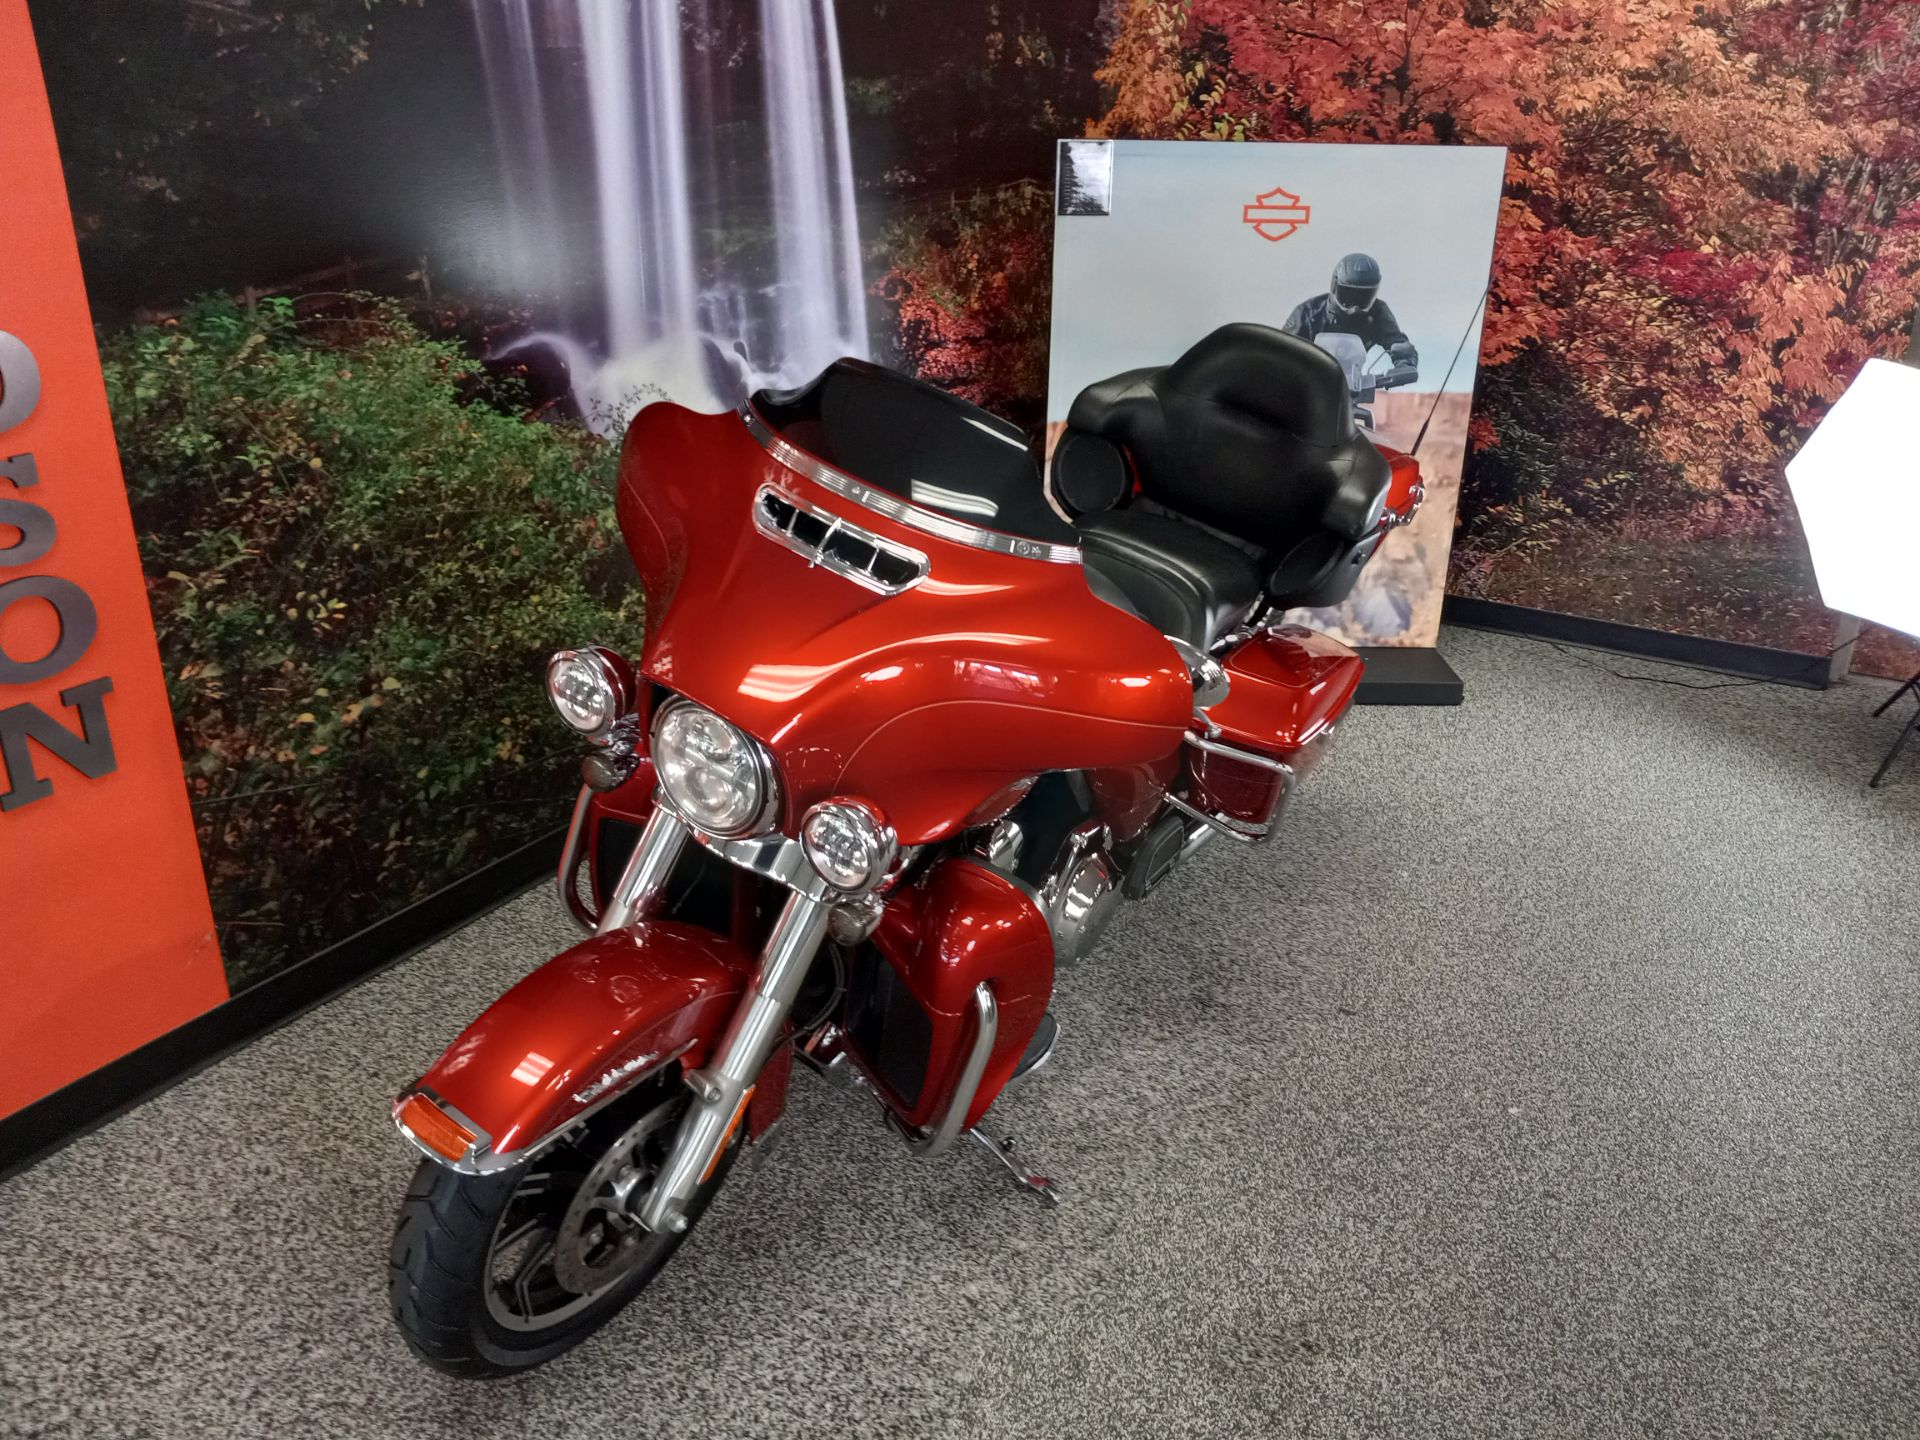 2014 Harley-Davidson Electra Glide® Ultra Classic® in Knoxville, Tennessee - Photo 6